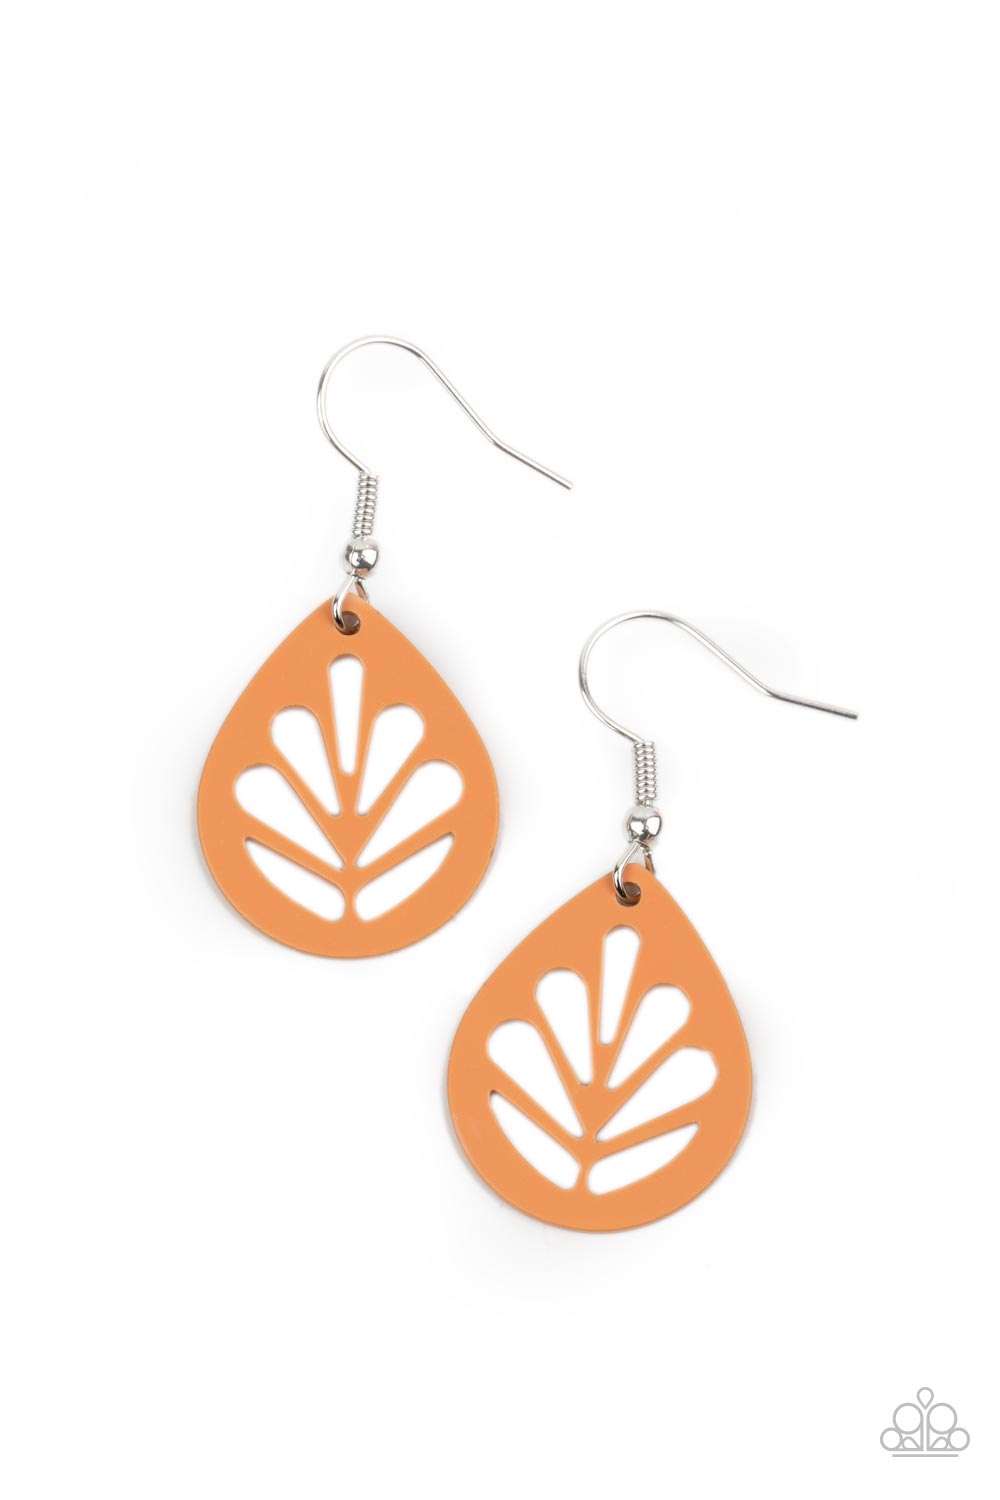 LEAF Yourself Wide Open Orange Earring - Paparazzi Accessories  Painted in a colorful Marigold finish, a dainty orange leaf frame is stenciled in airy cutouts for a whimsical seasonal fashion. Earring attaches to a standard fishhook fitting.  All Paparazzi Accessories are lead free and nickel free!  Sold as one pair of earrings.